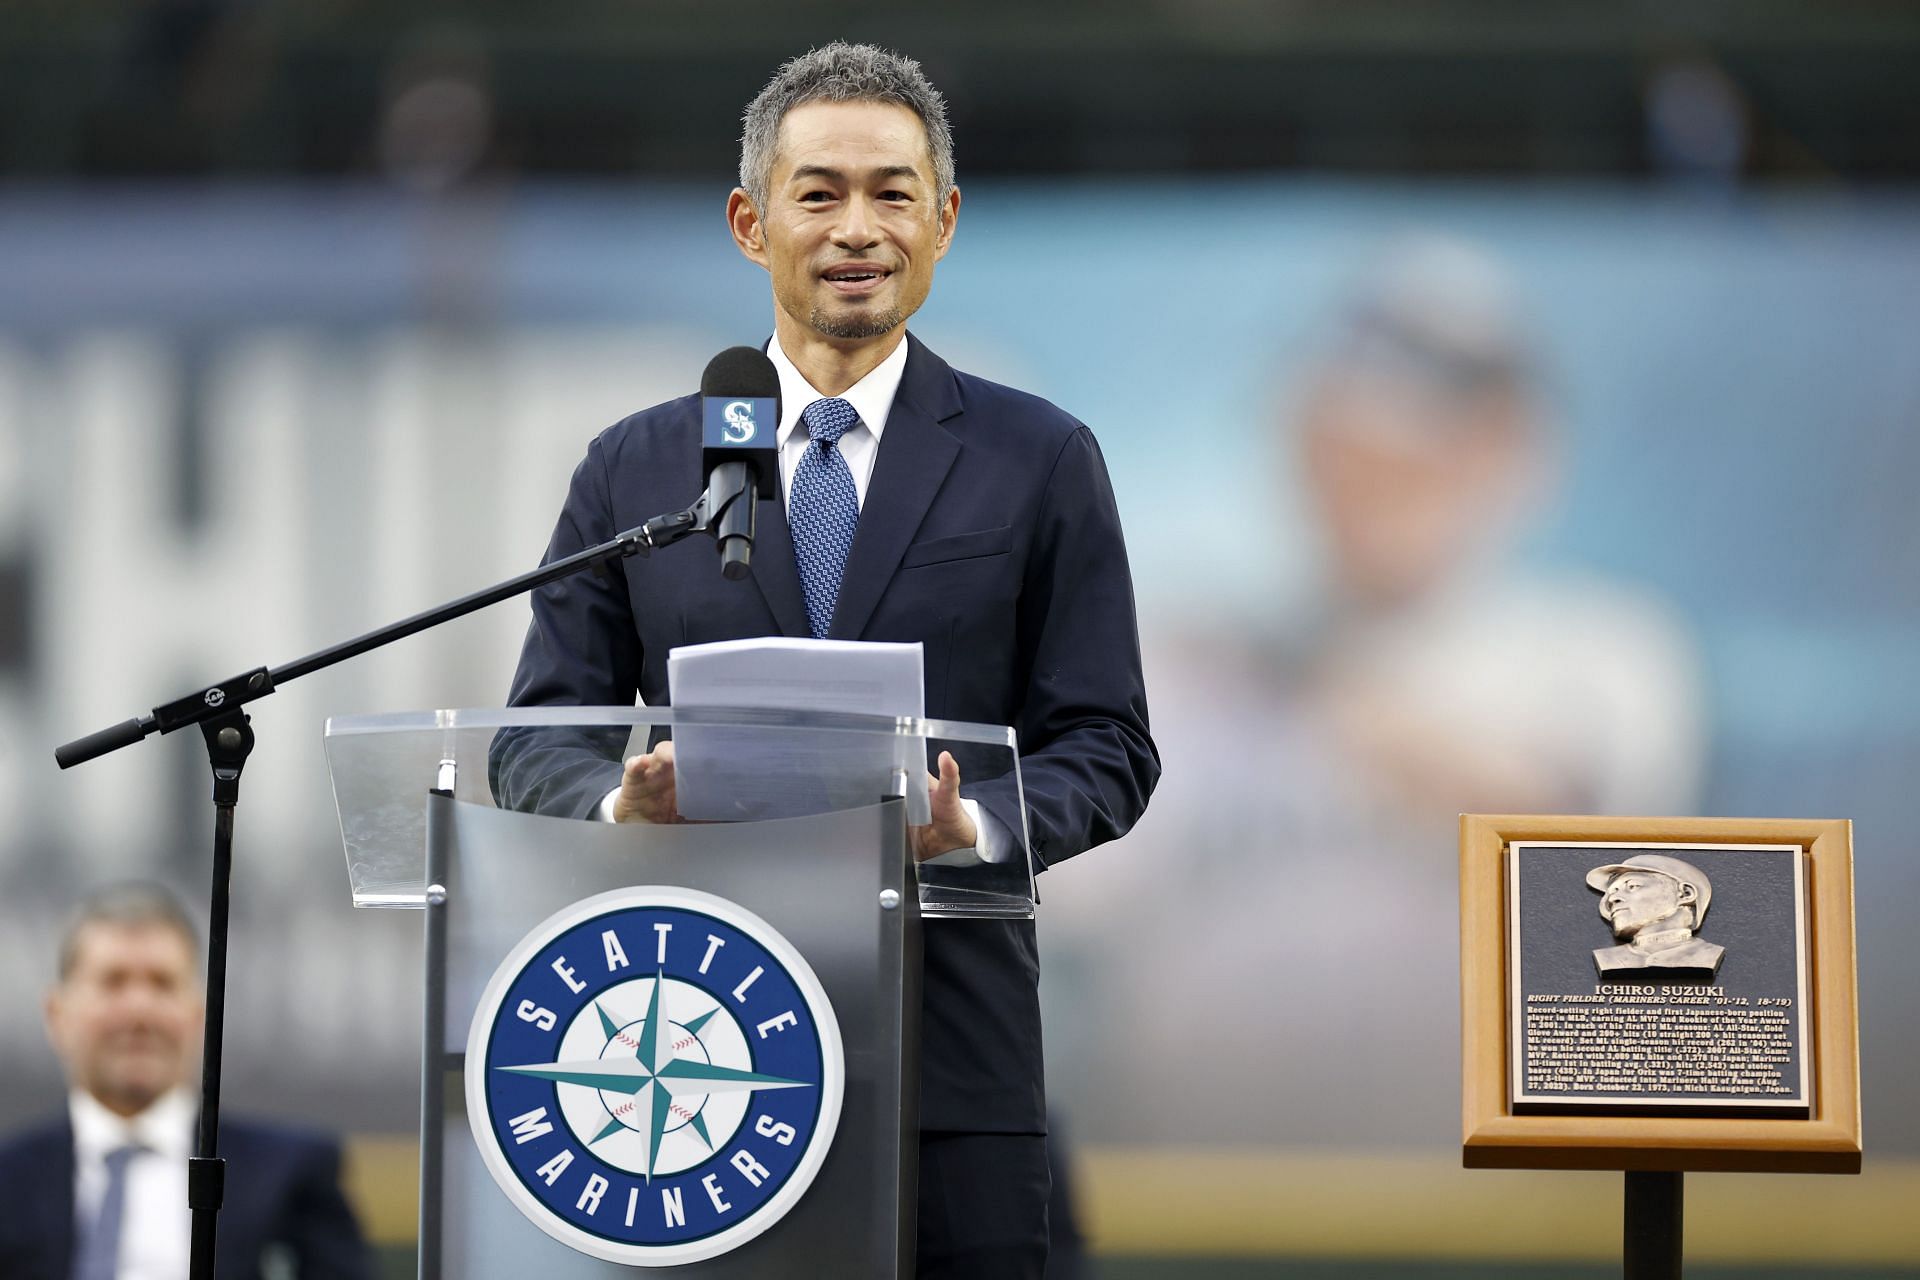 Ichiro Suzuki signs minor league deal with Mariners to play in Japan -  Sports Illustrated